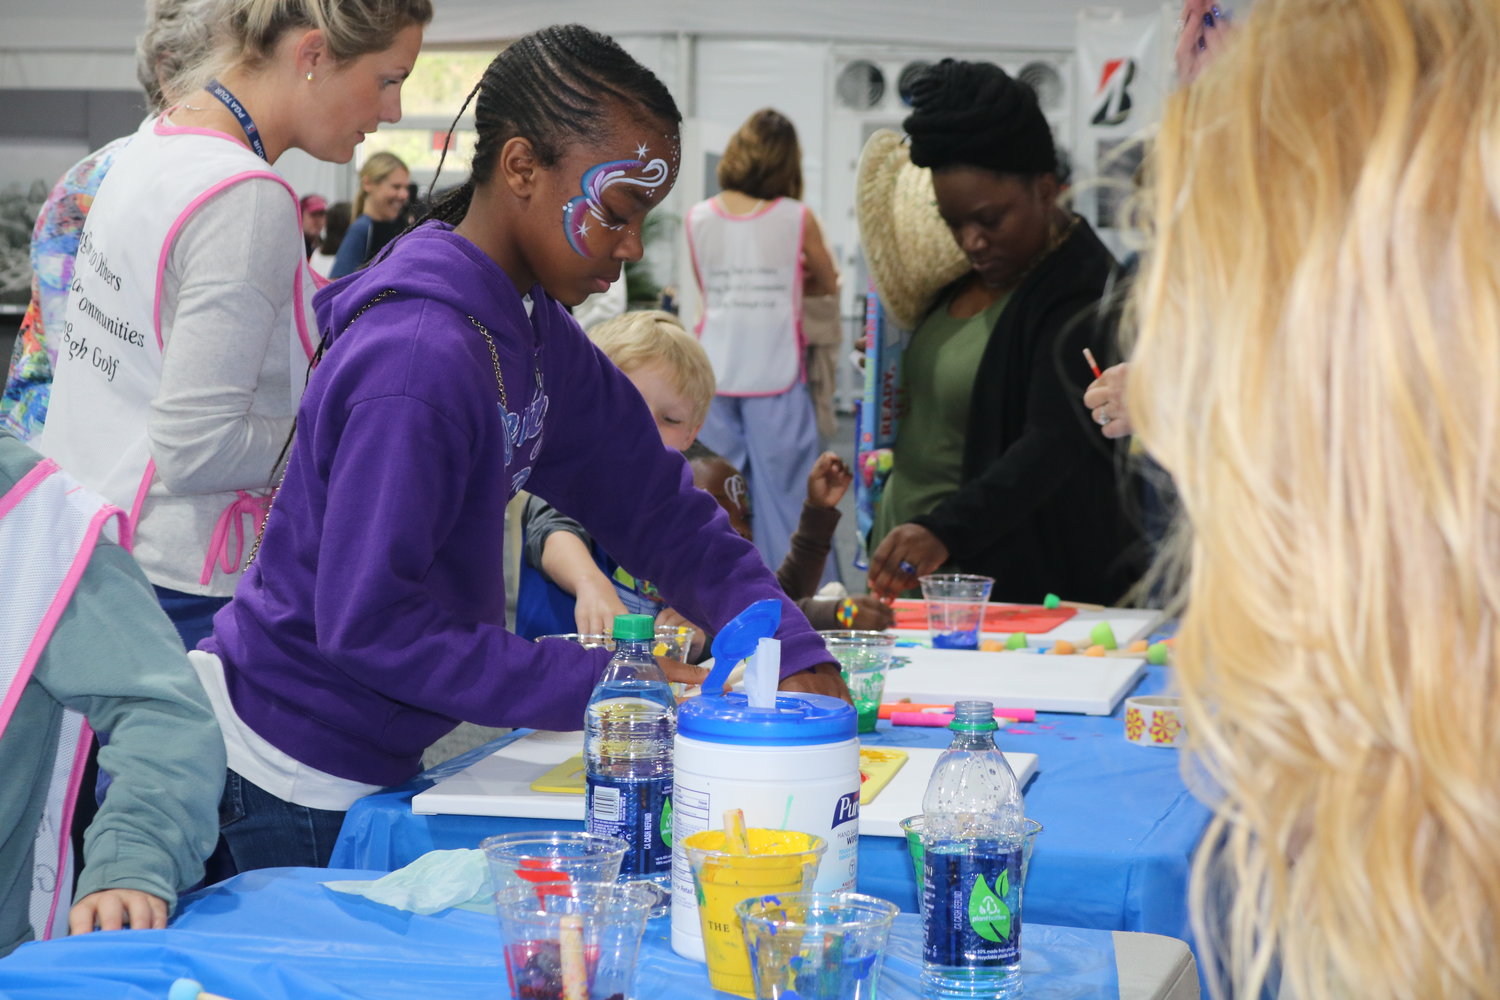 Kids at the event enjoys painting and arts and crafts.